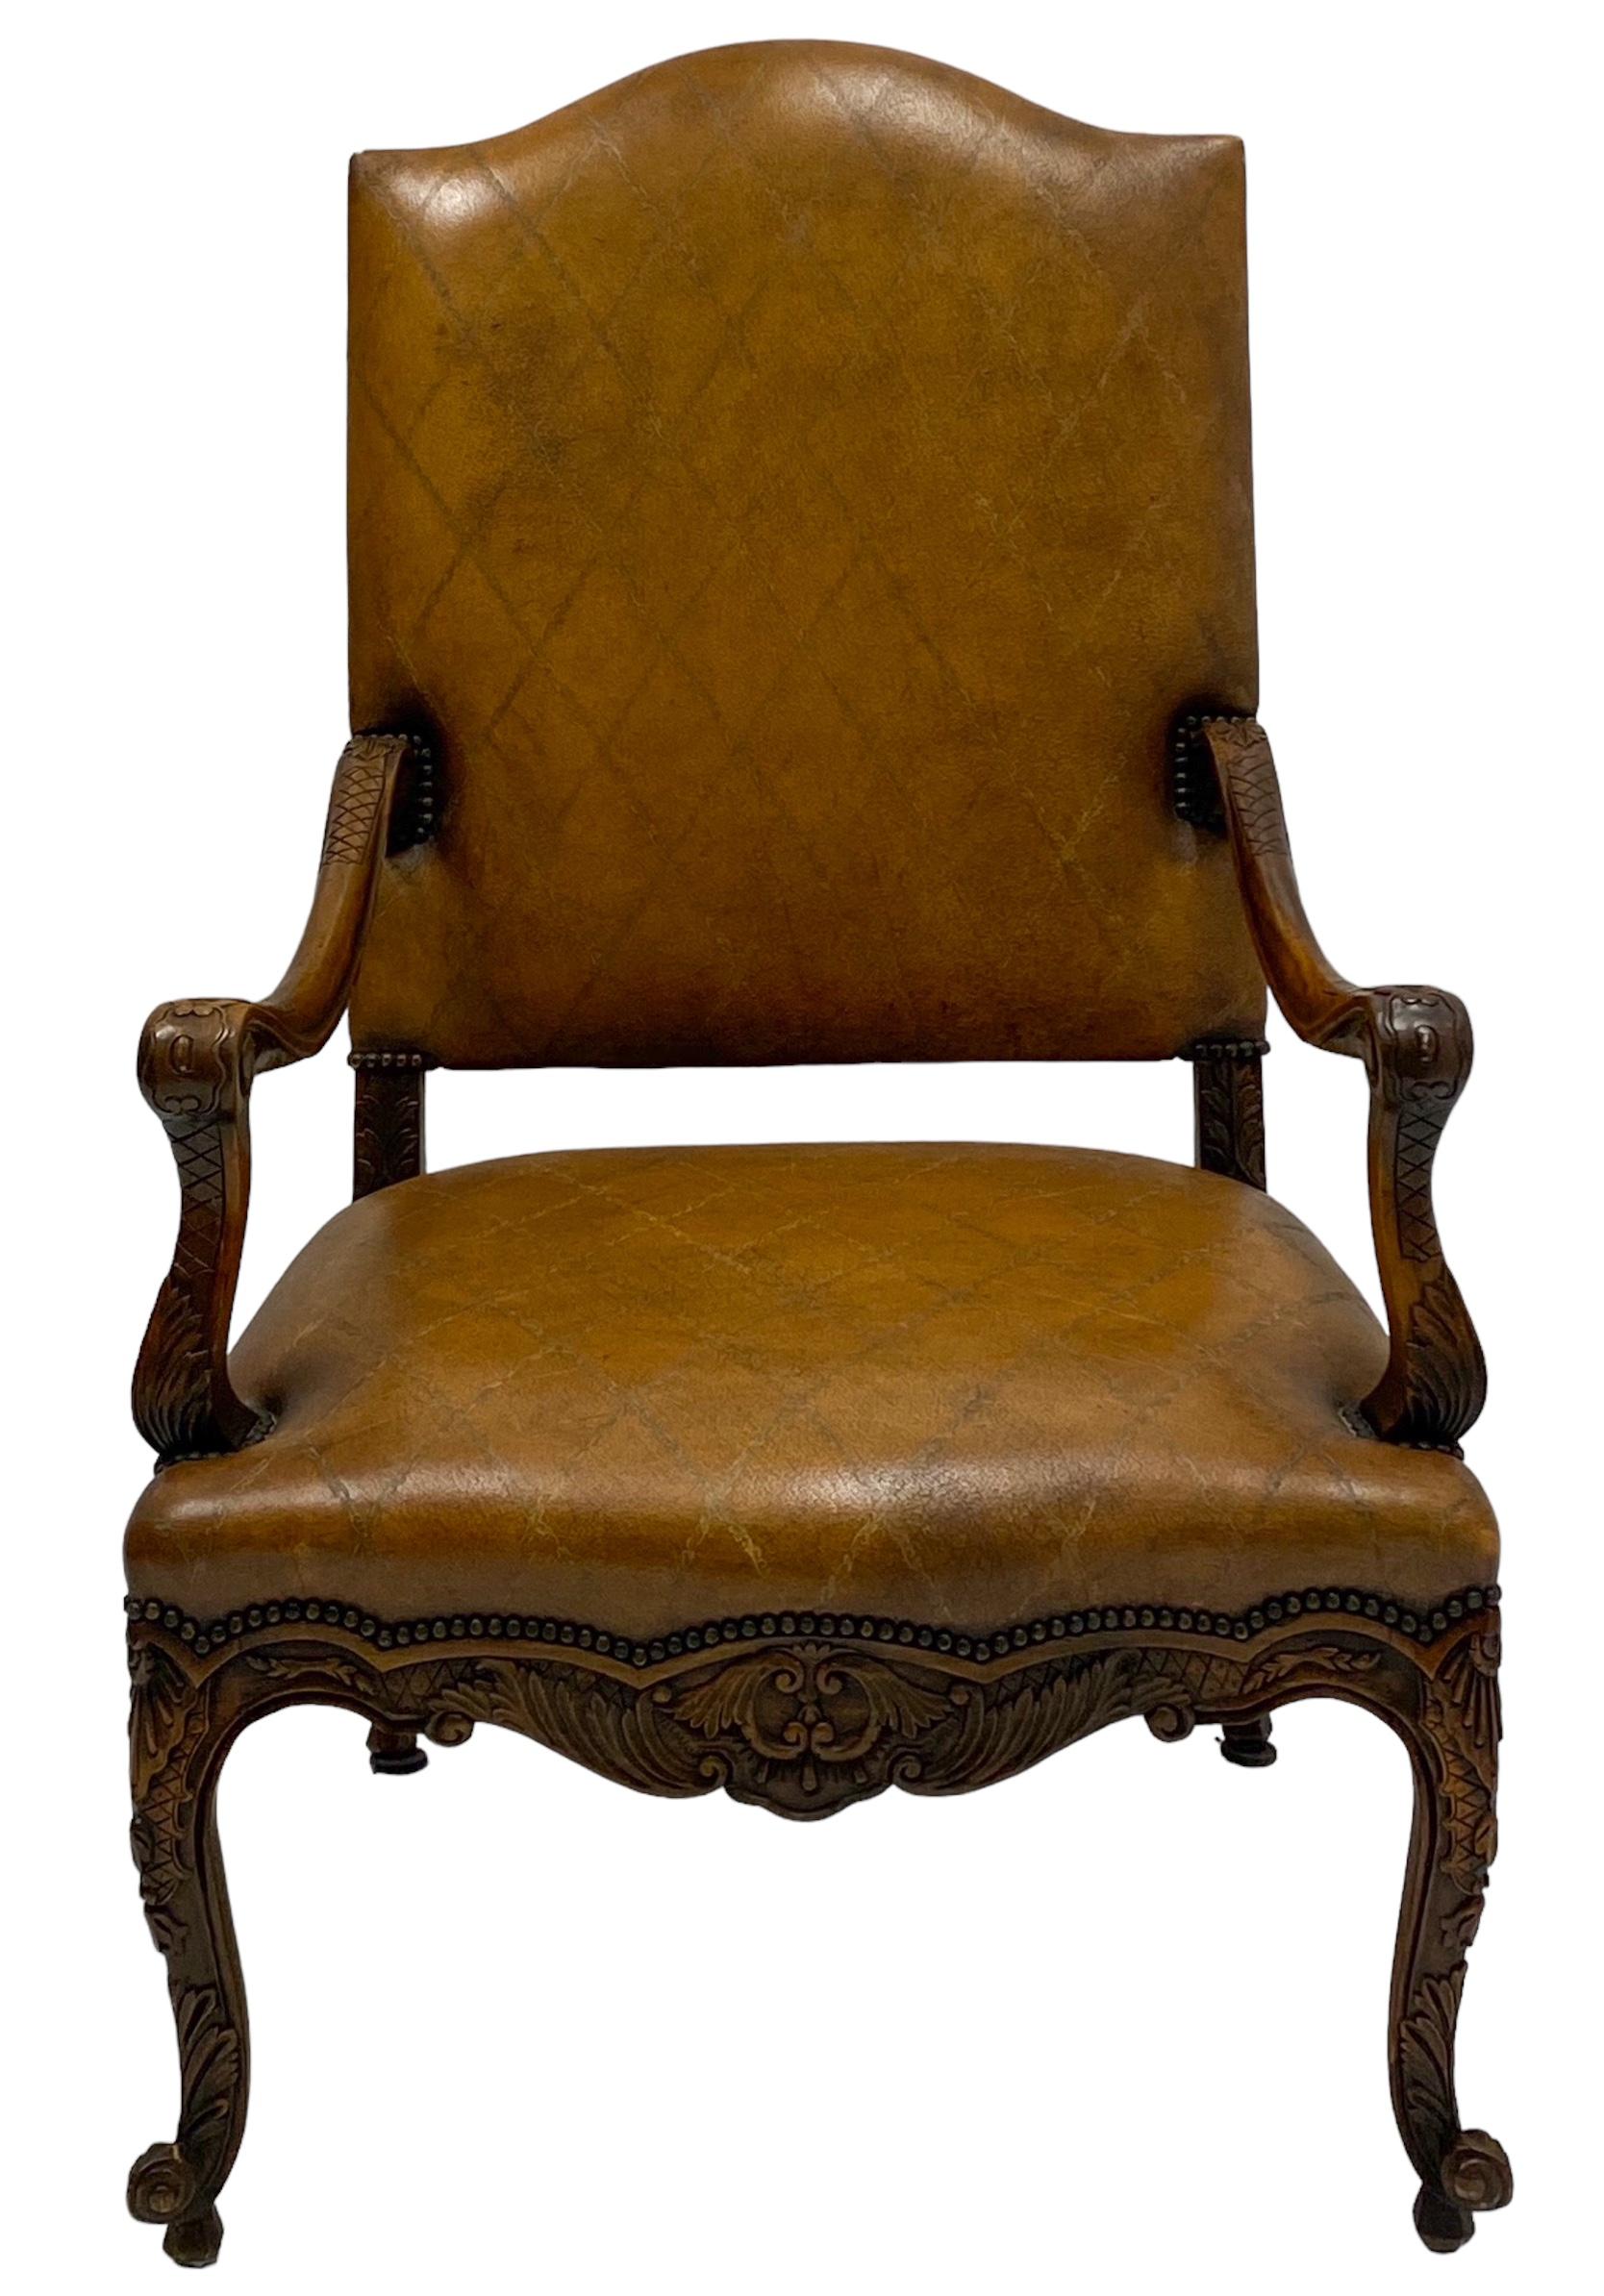 20th Century French Louis XIV Style Carved Fruitwood And Leather Bergere / Arm Chair  For Sale